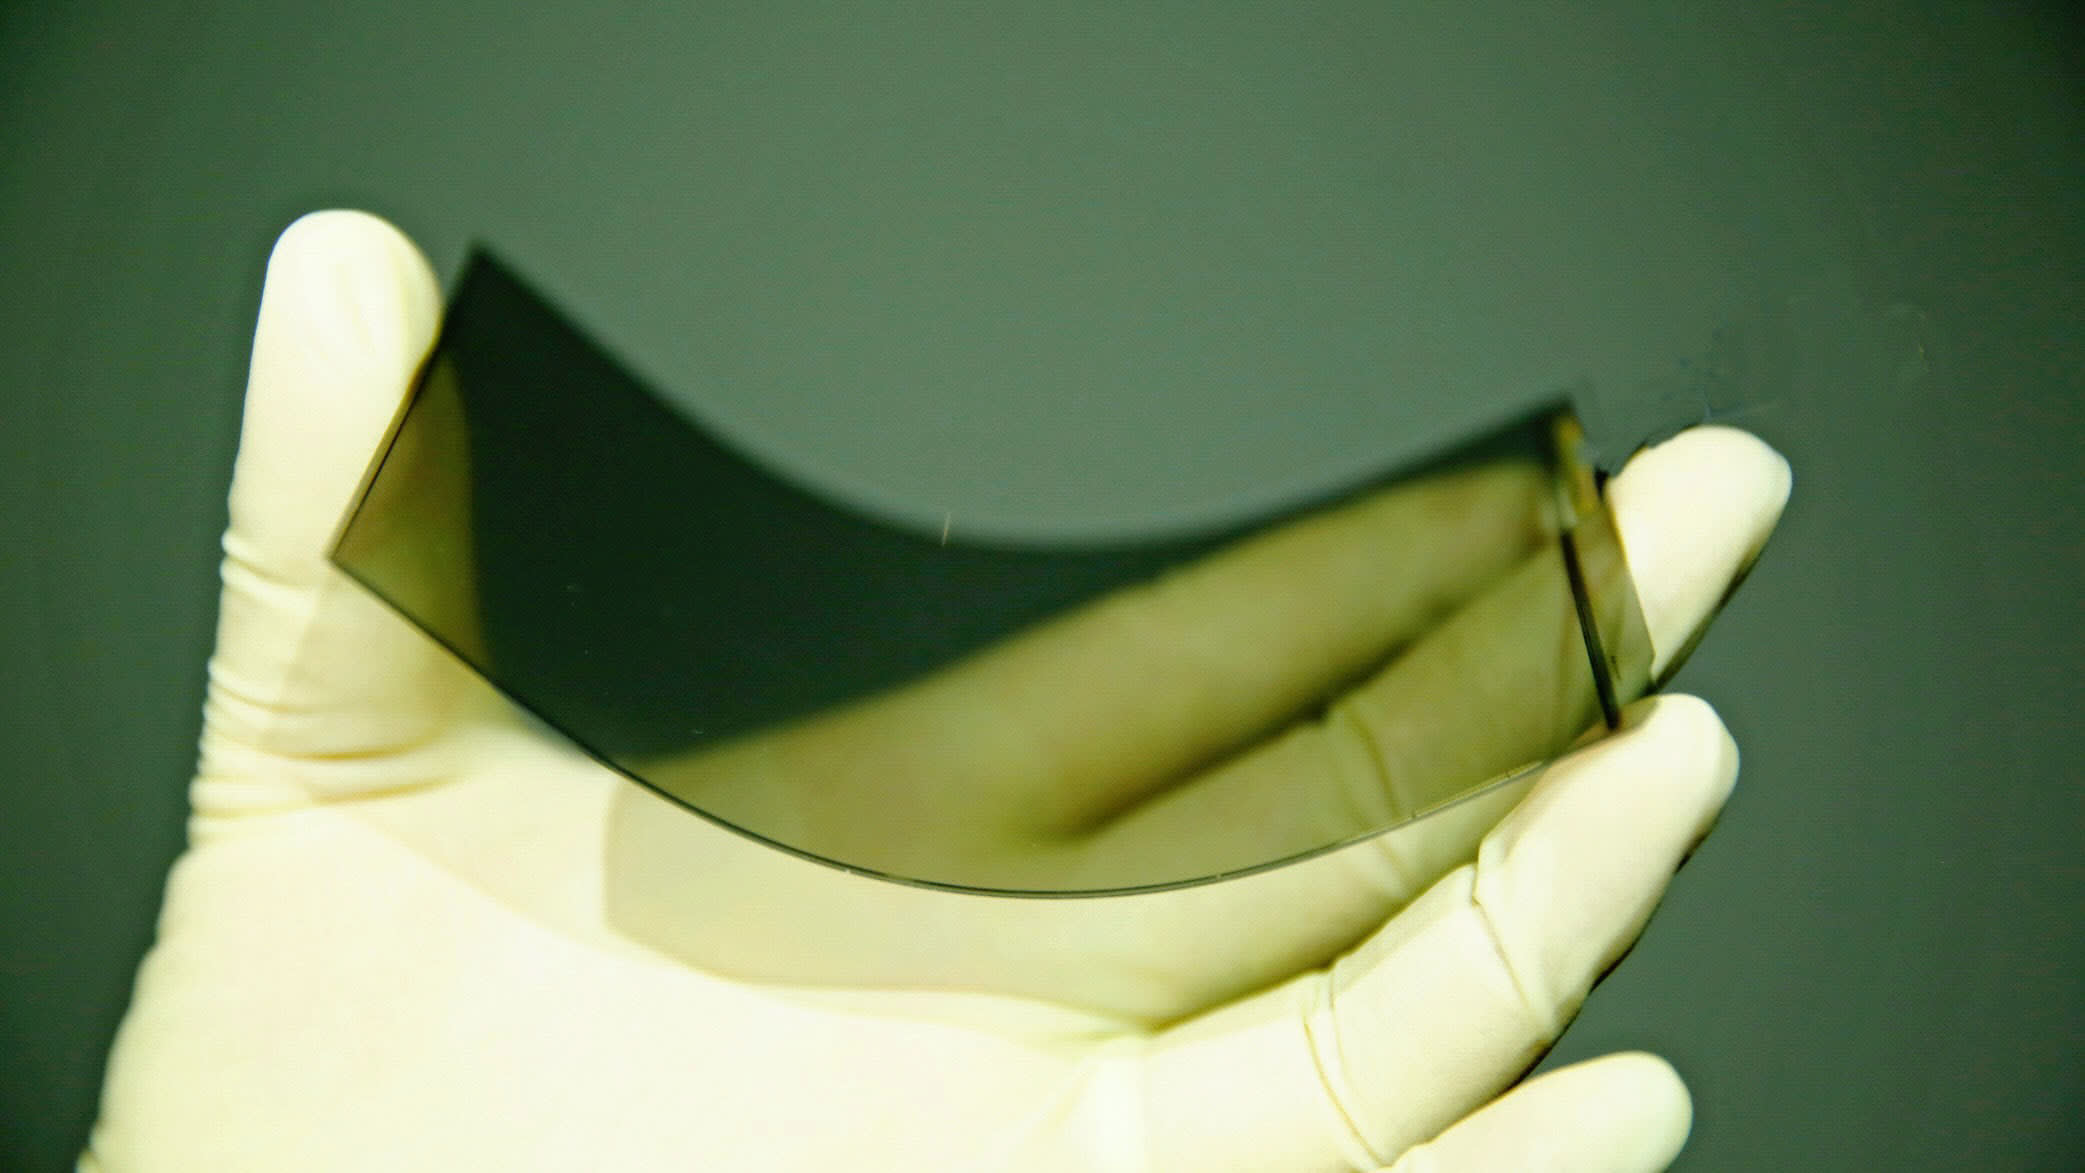 Bendable OLED panels will be key to making foldable smartphones